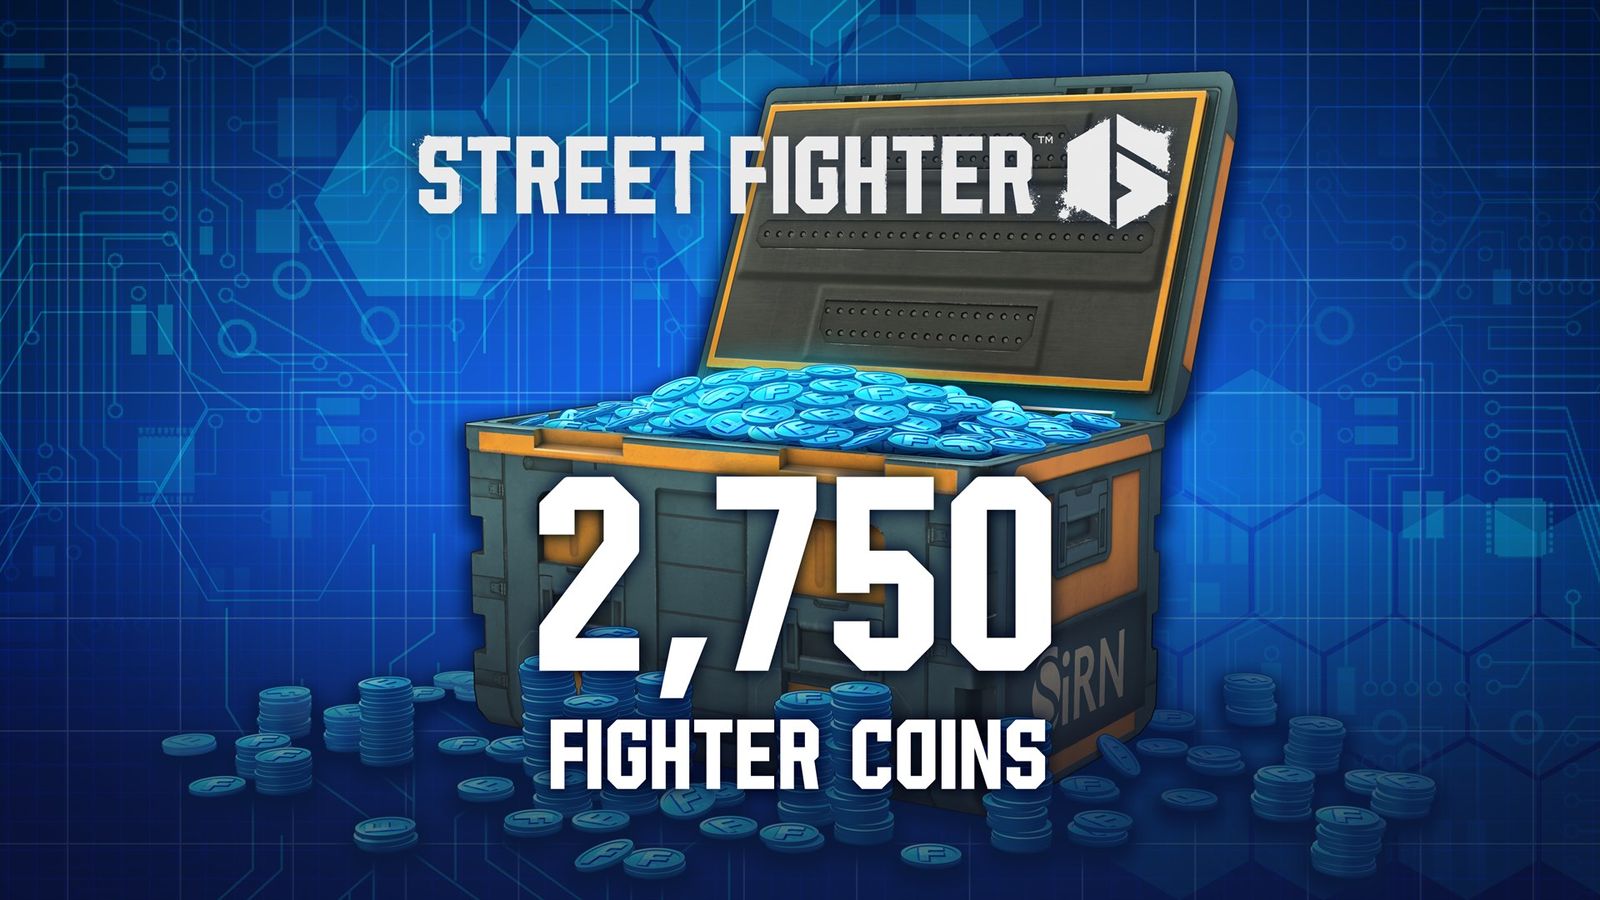 Street Fighter 6 2750 Fighter Coins chest